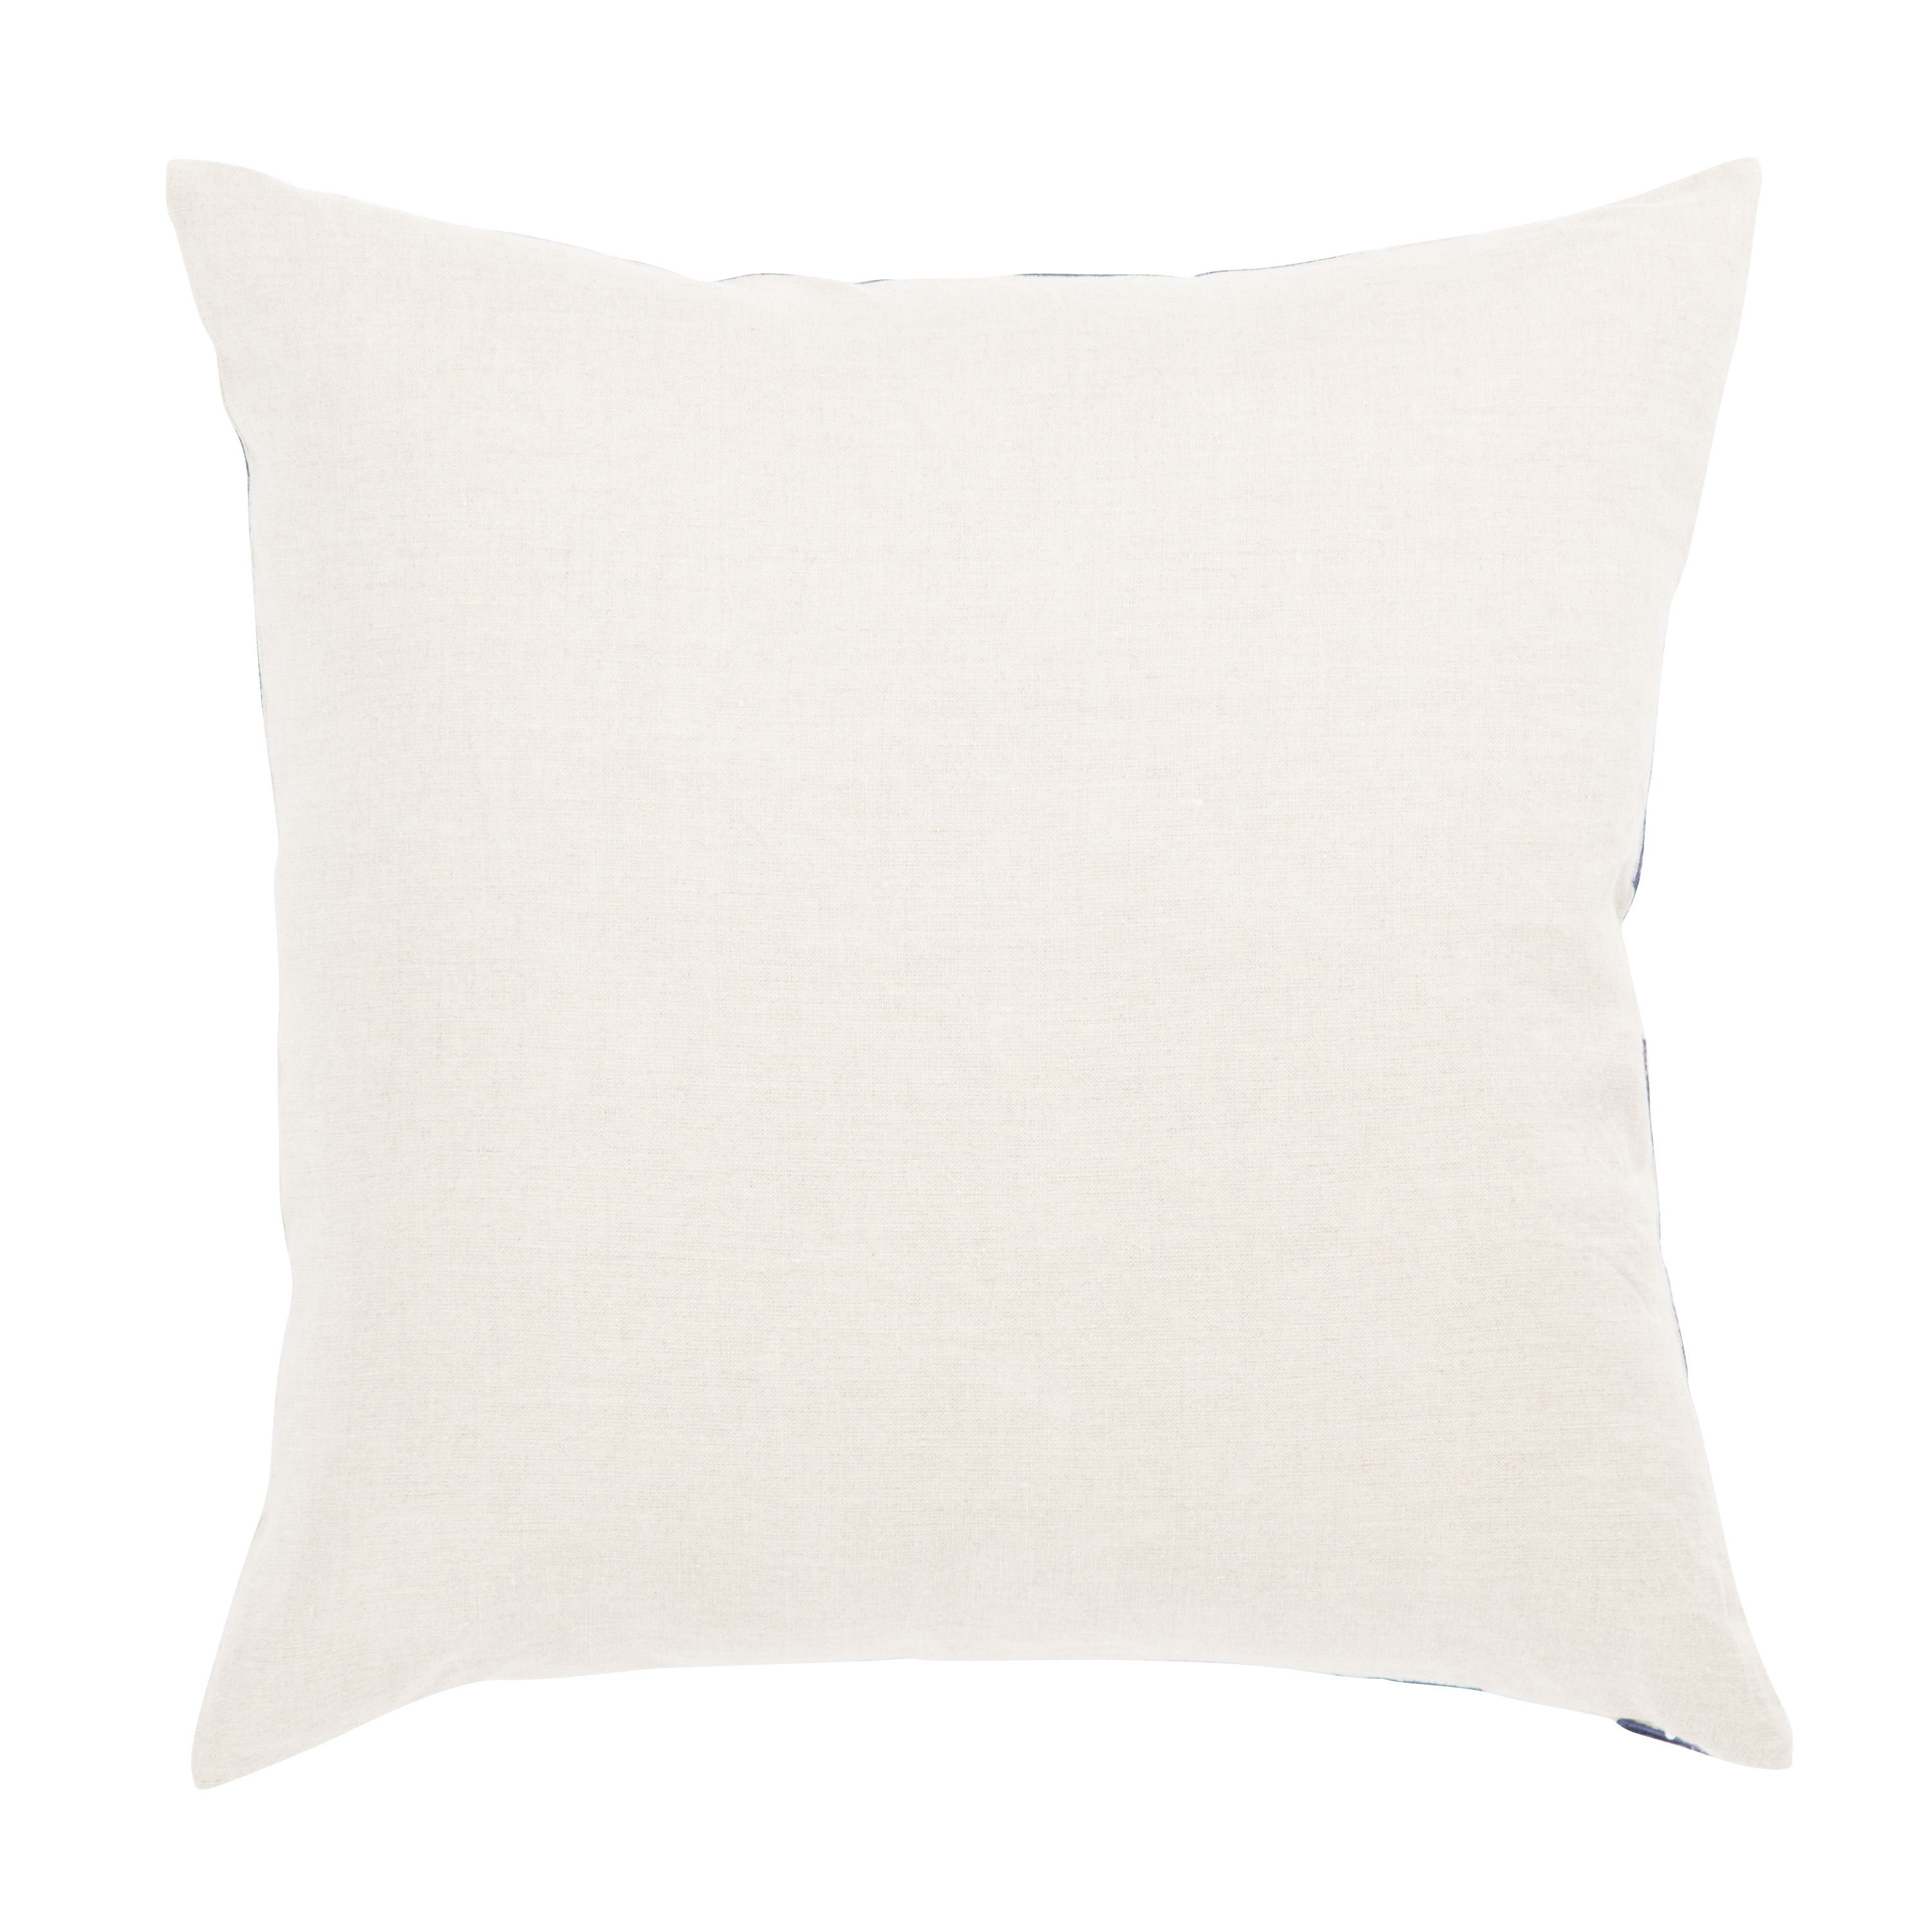 Design (US) Blue 22"X22" Pillow w/Poly fill - Image 1